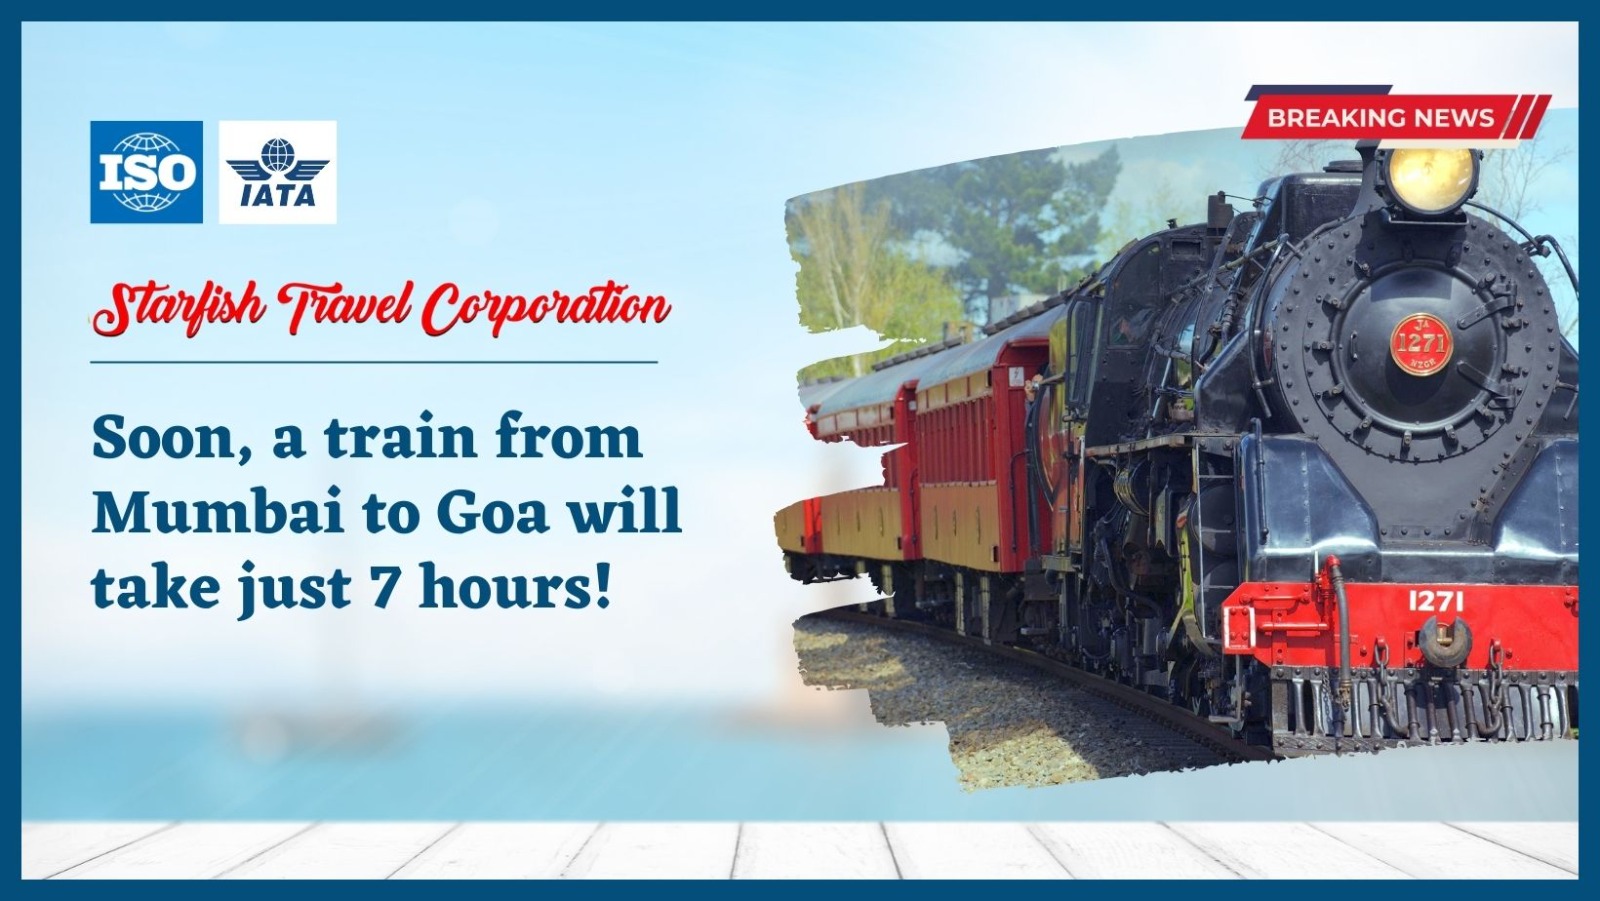 Soon, a train from Mumbai to Goa will take just 7 hours!